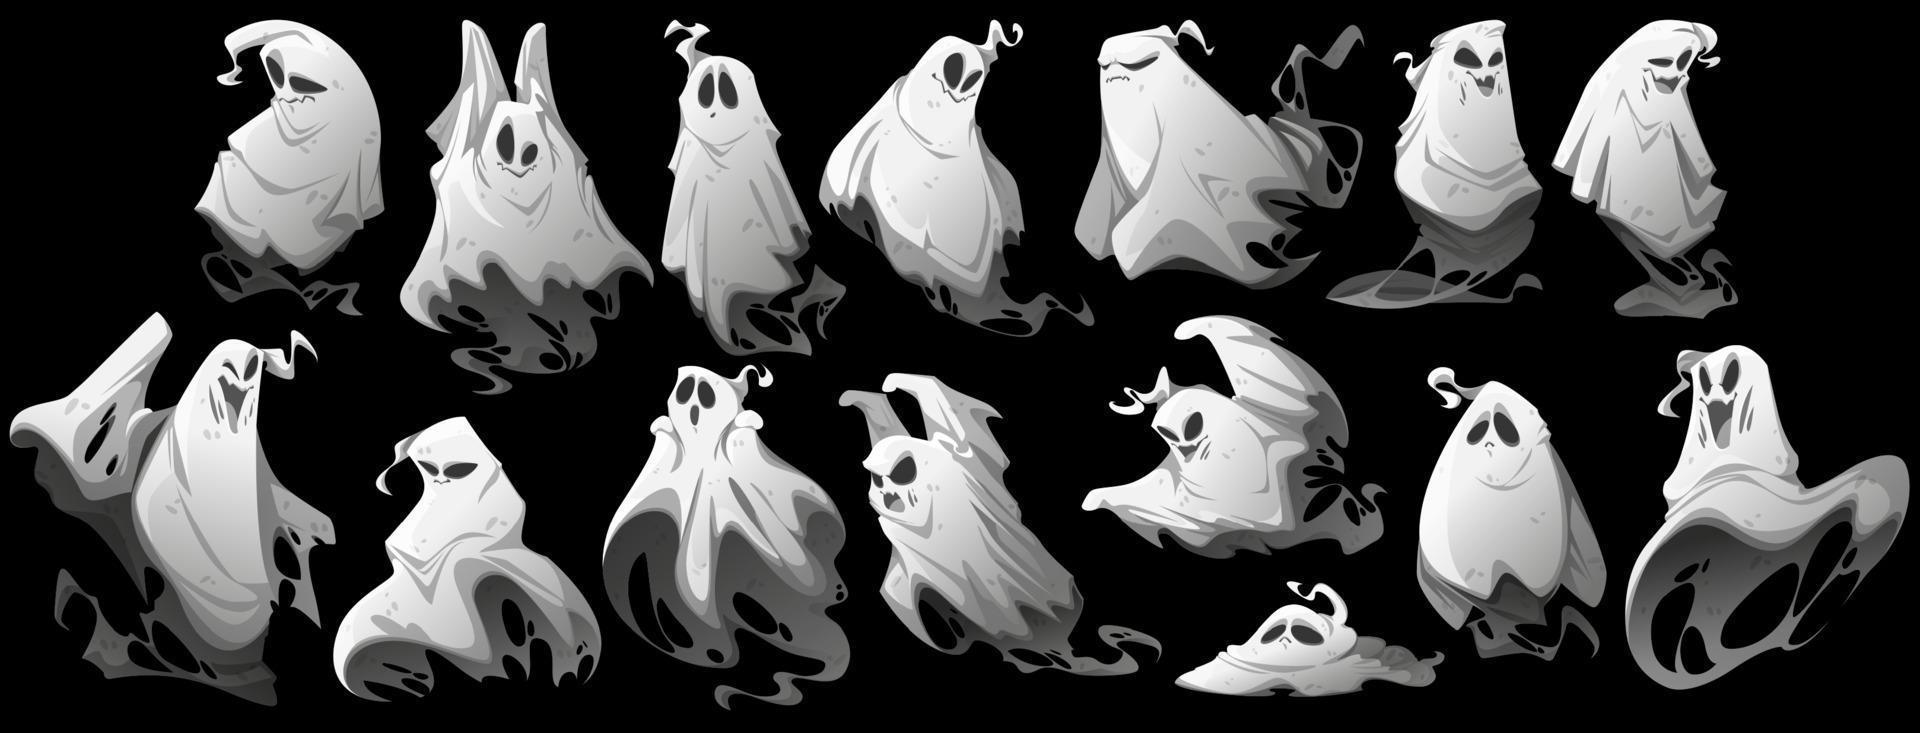 Halloween set with ghost characters vector